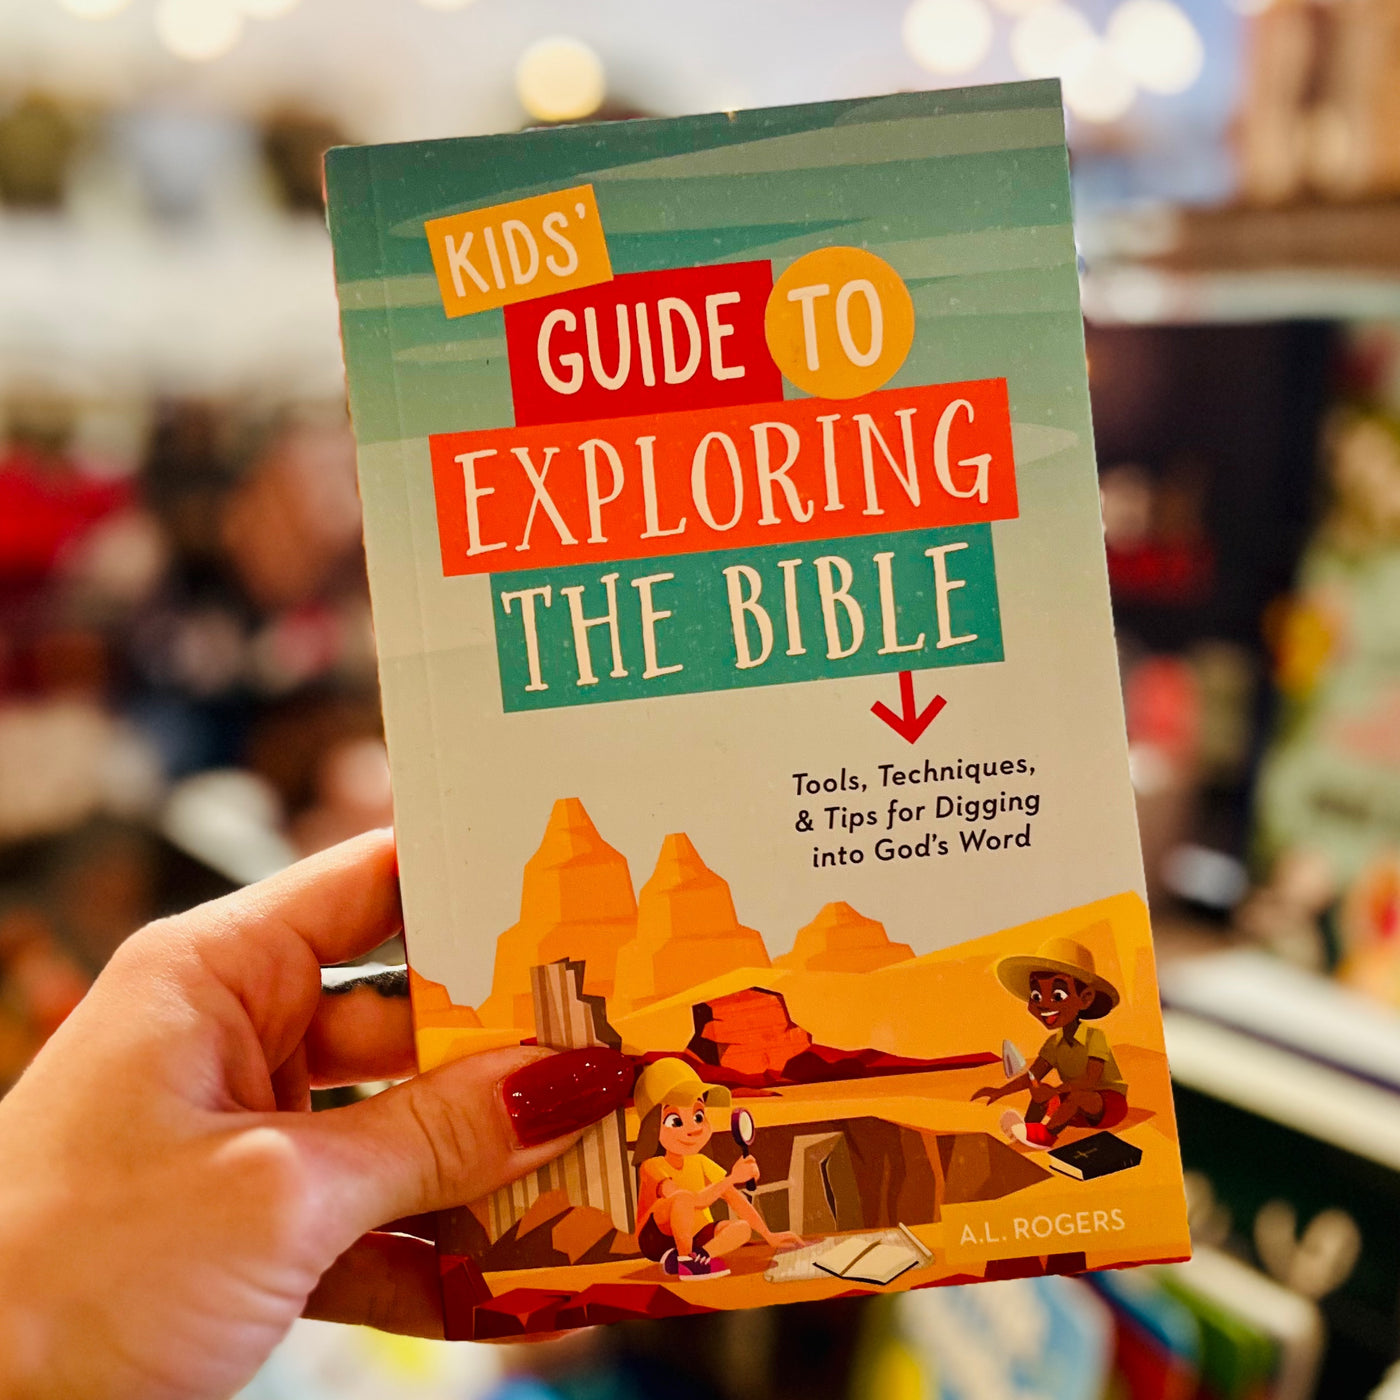 Kids' Guide to Exploring the Bible